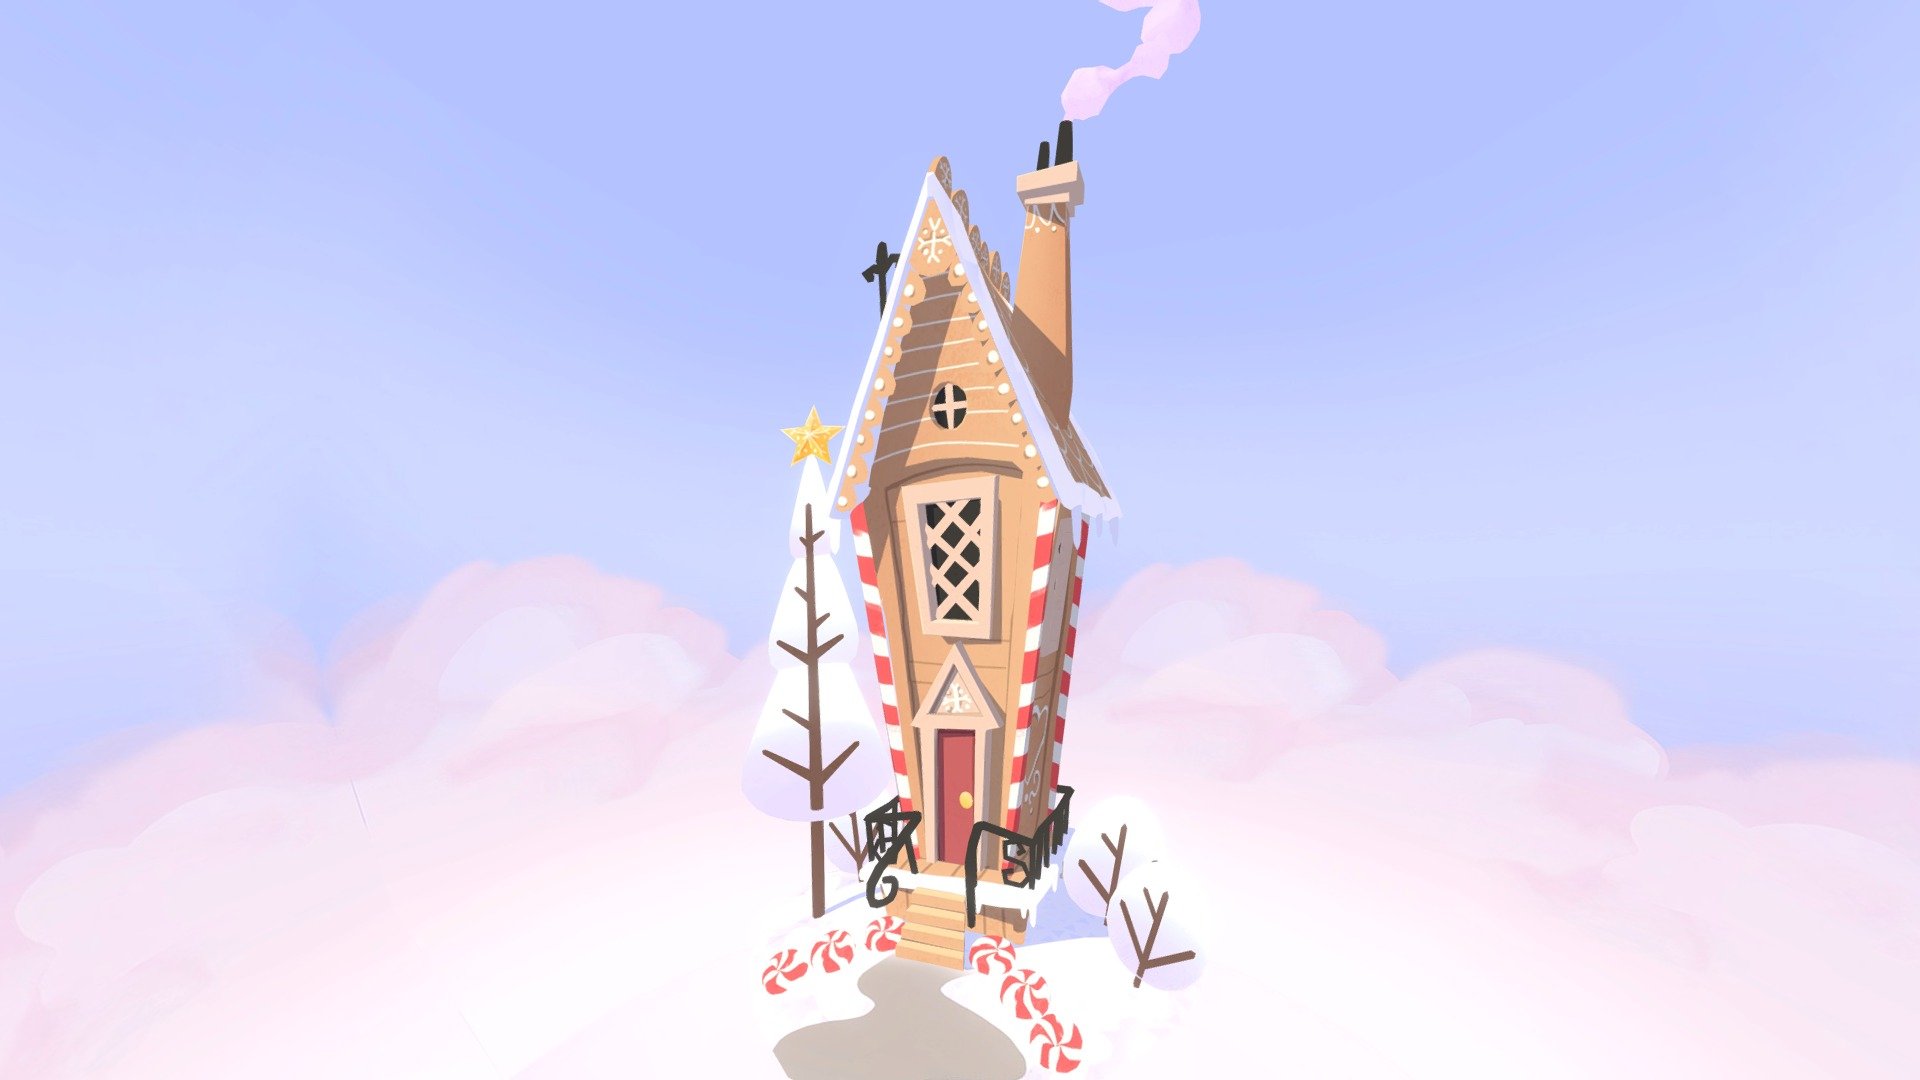 Experimentation with style. Flat colour, 2k texture - Wintery Gingerbread House - 3D model by glenatron 3d model